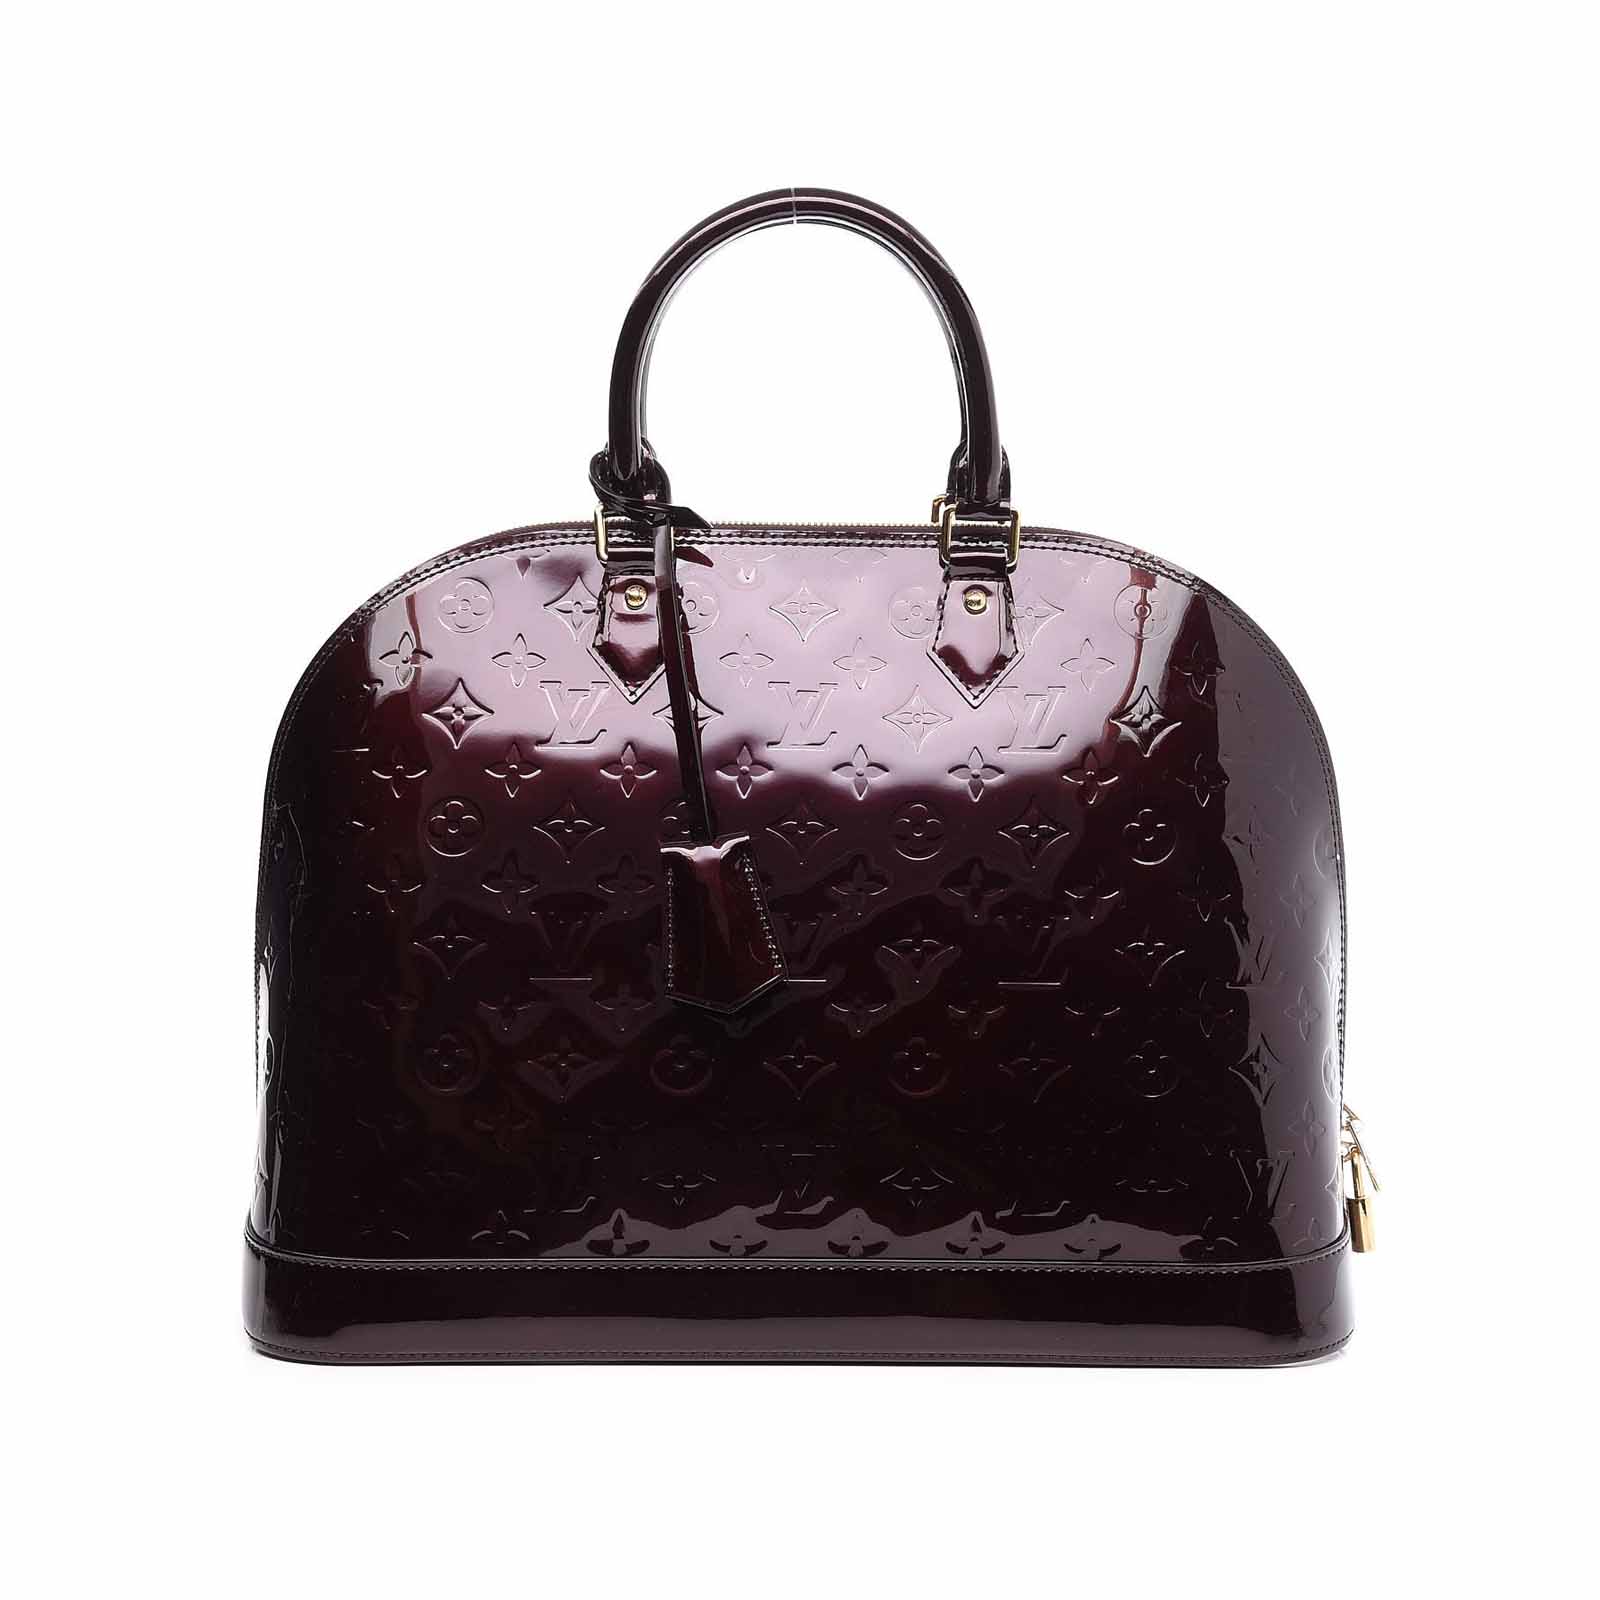 How Much Are Louis Vuitton Bags? - Handbagholic